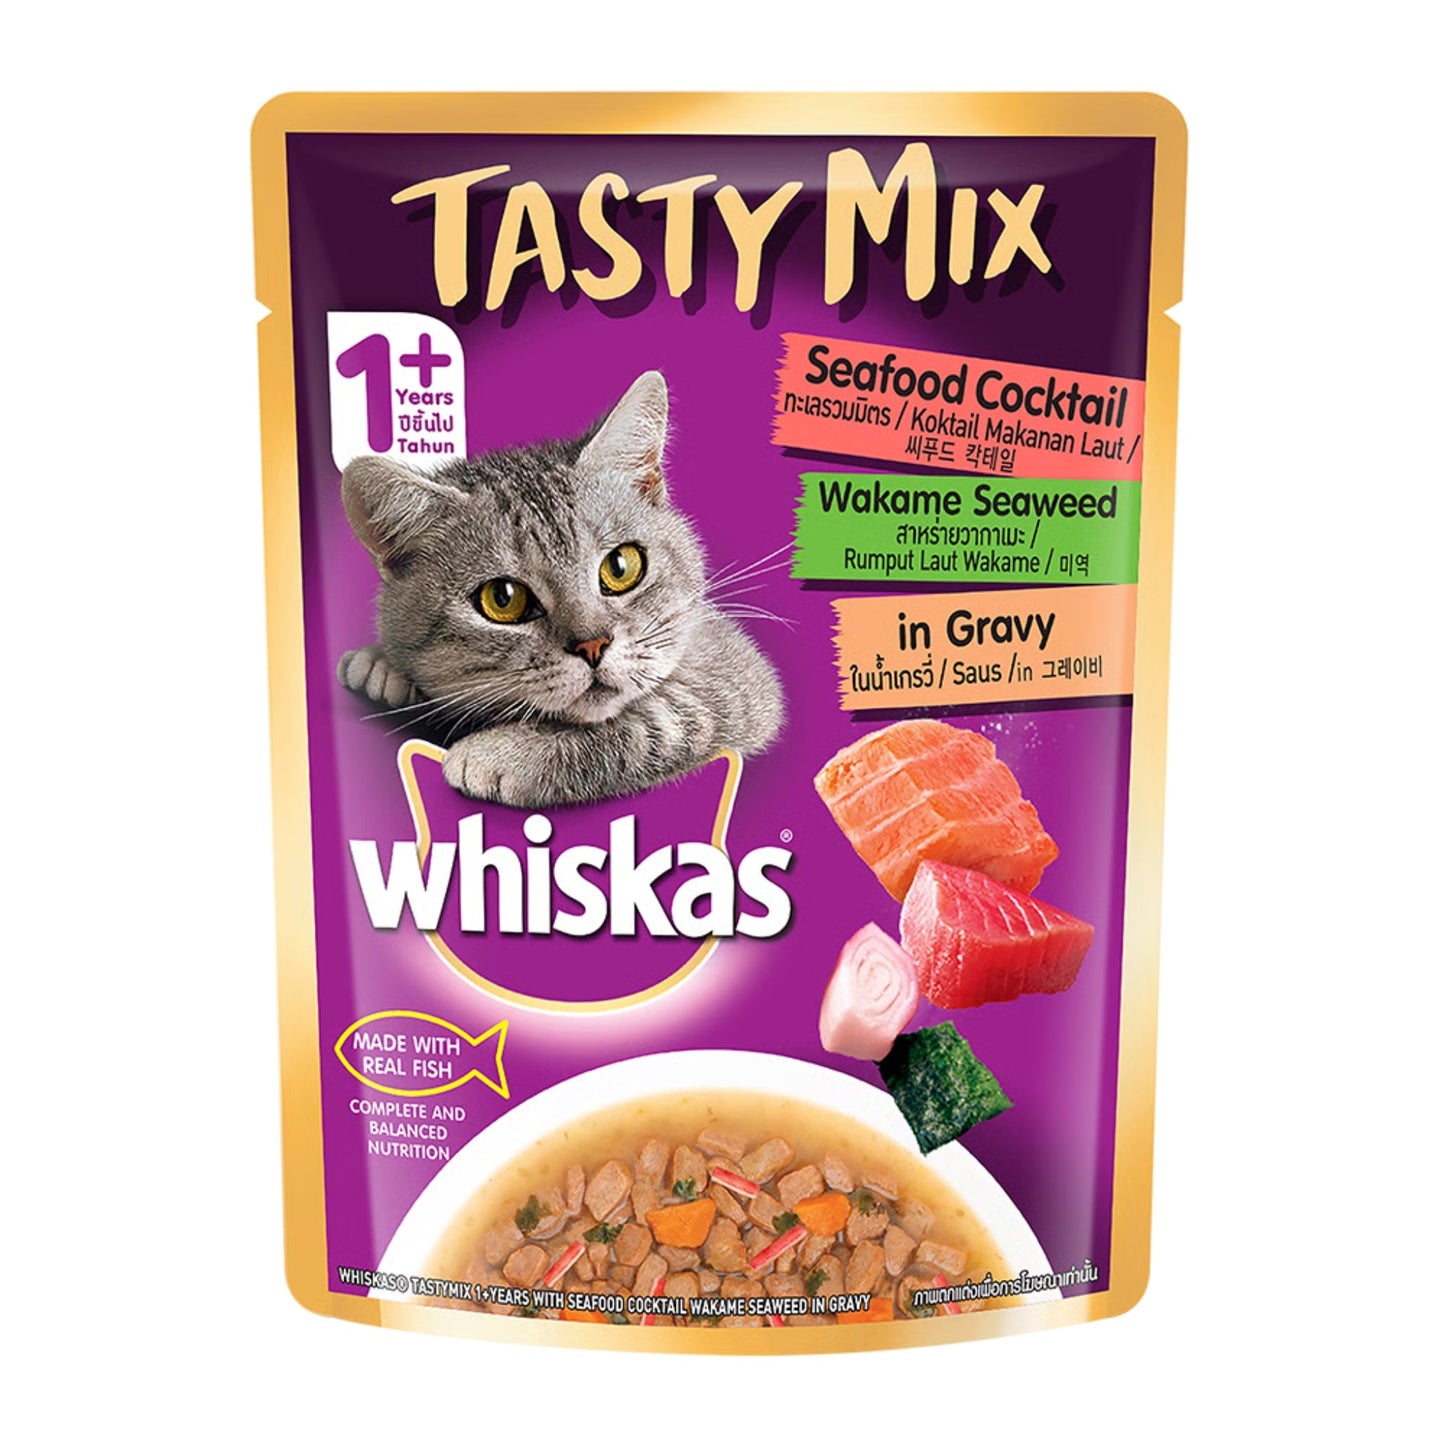 Whiskas Adult Cat Tasty Mix Seafood Cocktail in Gravy - 70g, Pack of 18